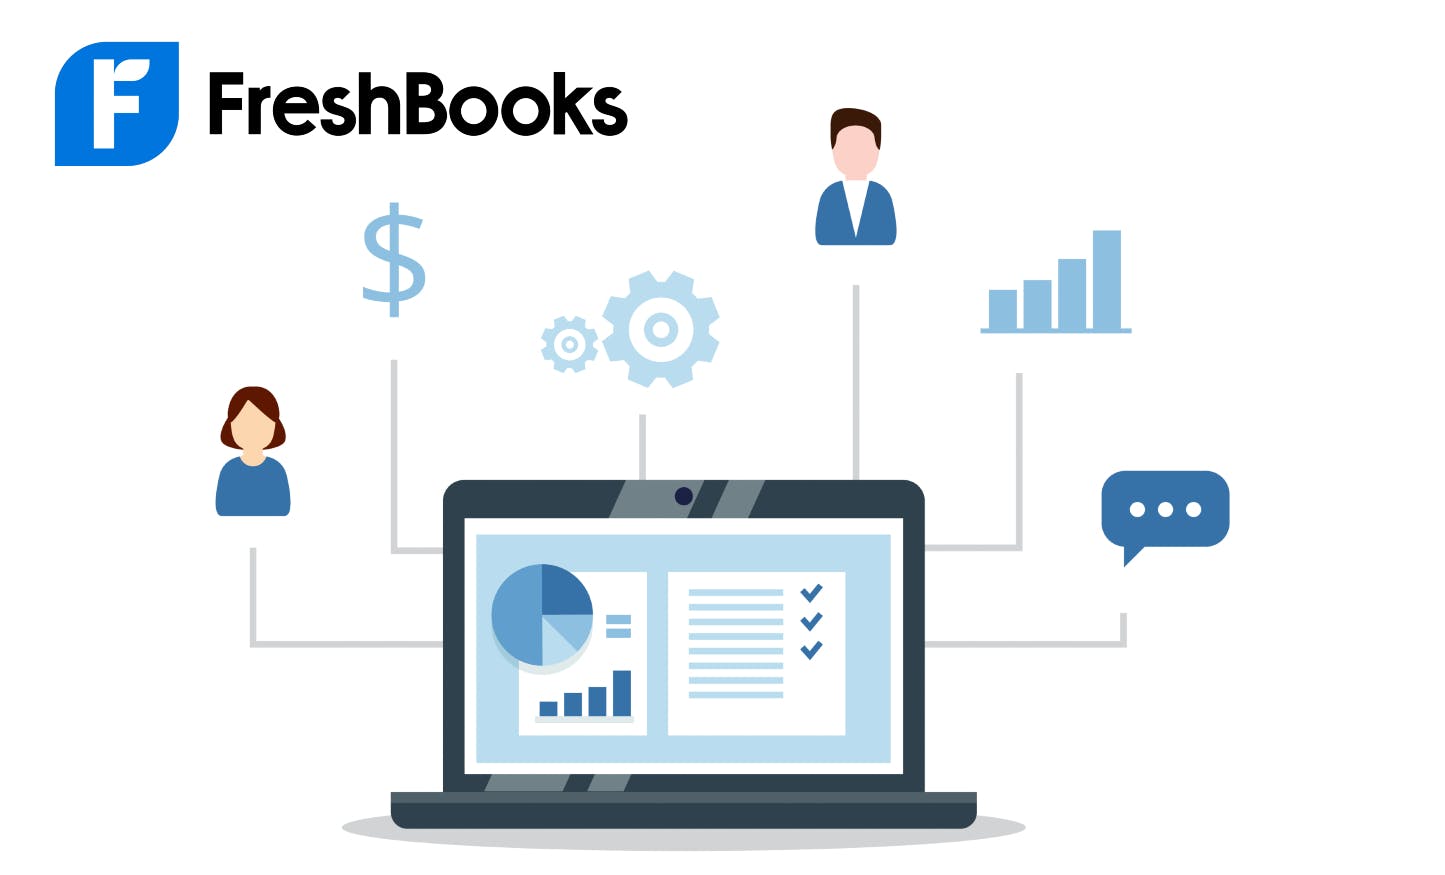 FreshBooks: Accounting Software Full Review